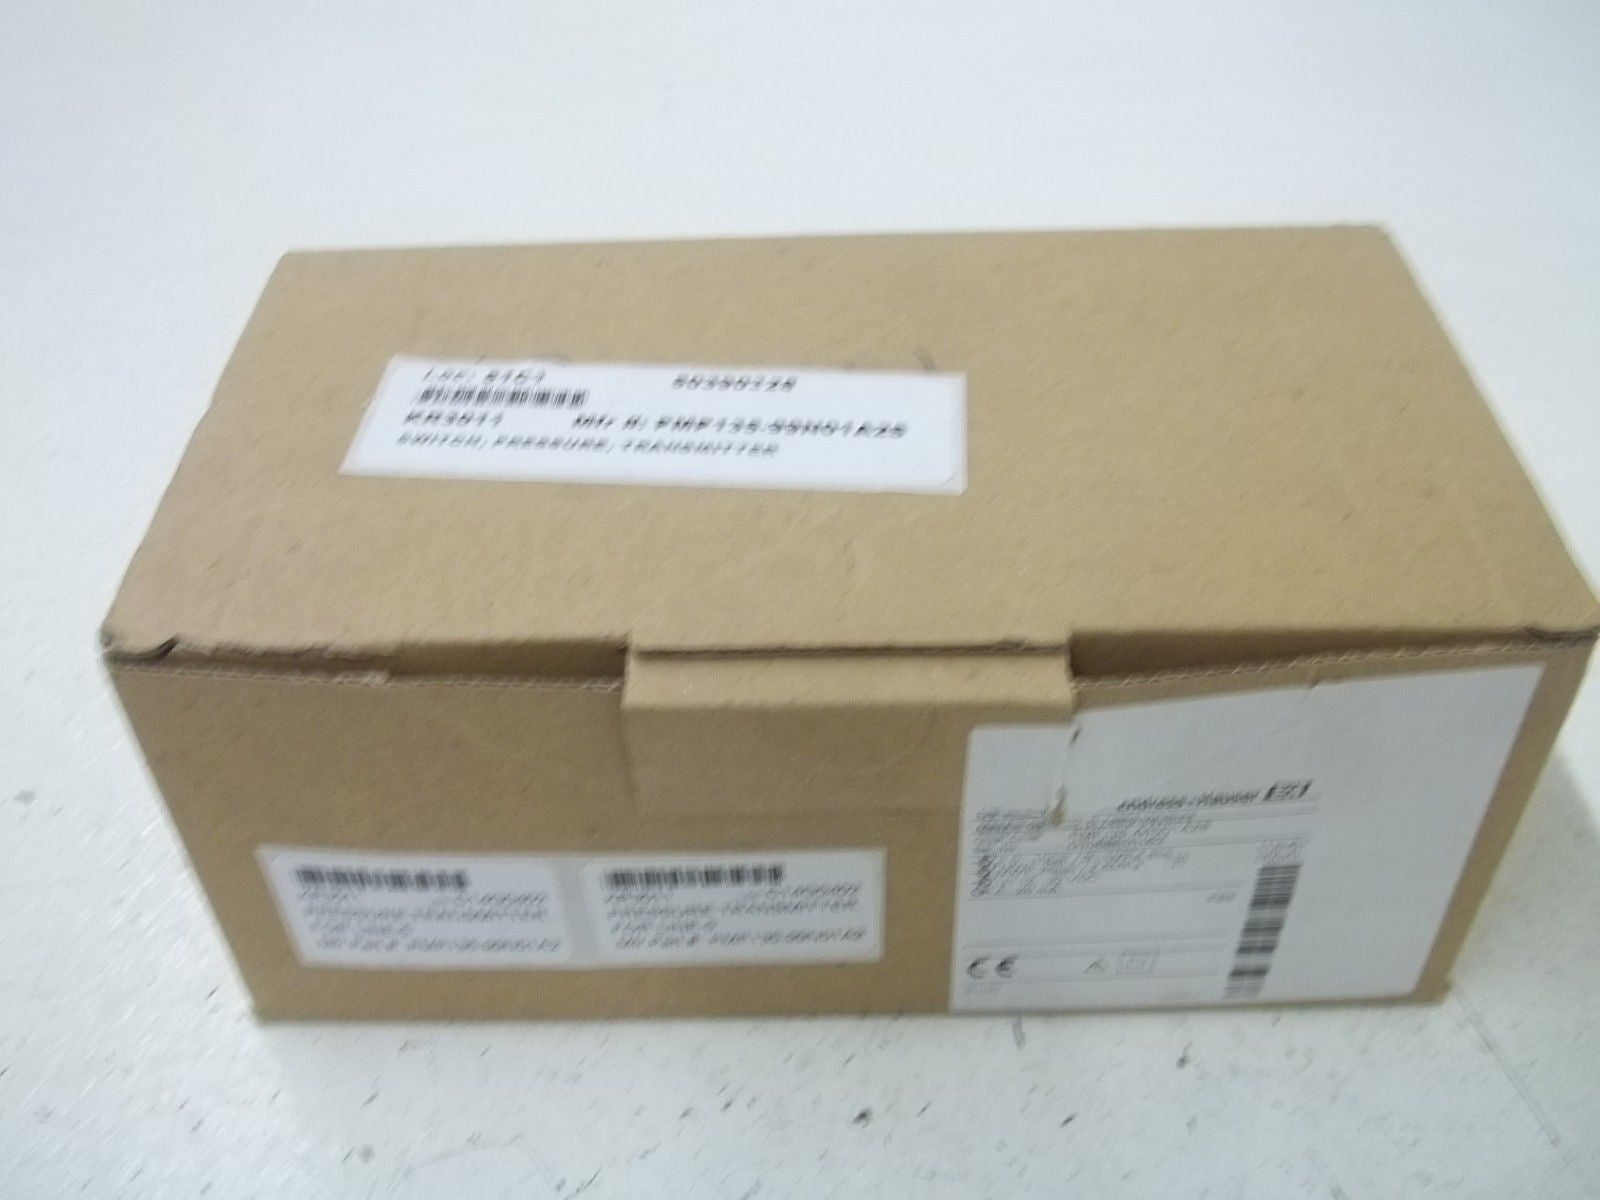 ENDRESS+HAUSER CERABAR T PMP135-A4N01A2S PRESSURE TRANSDUCER *NEW IN B ...